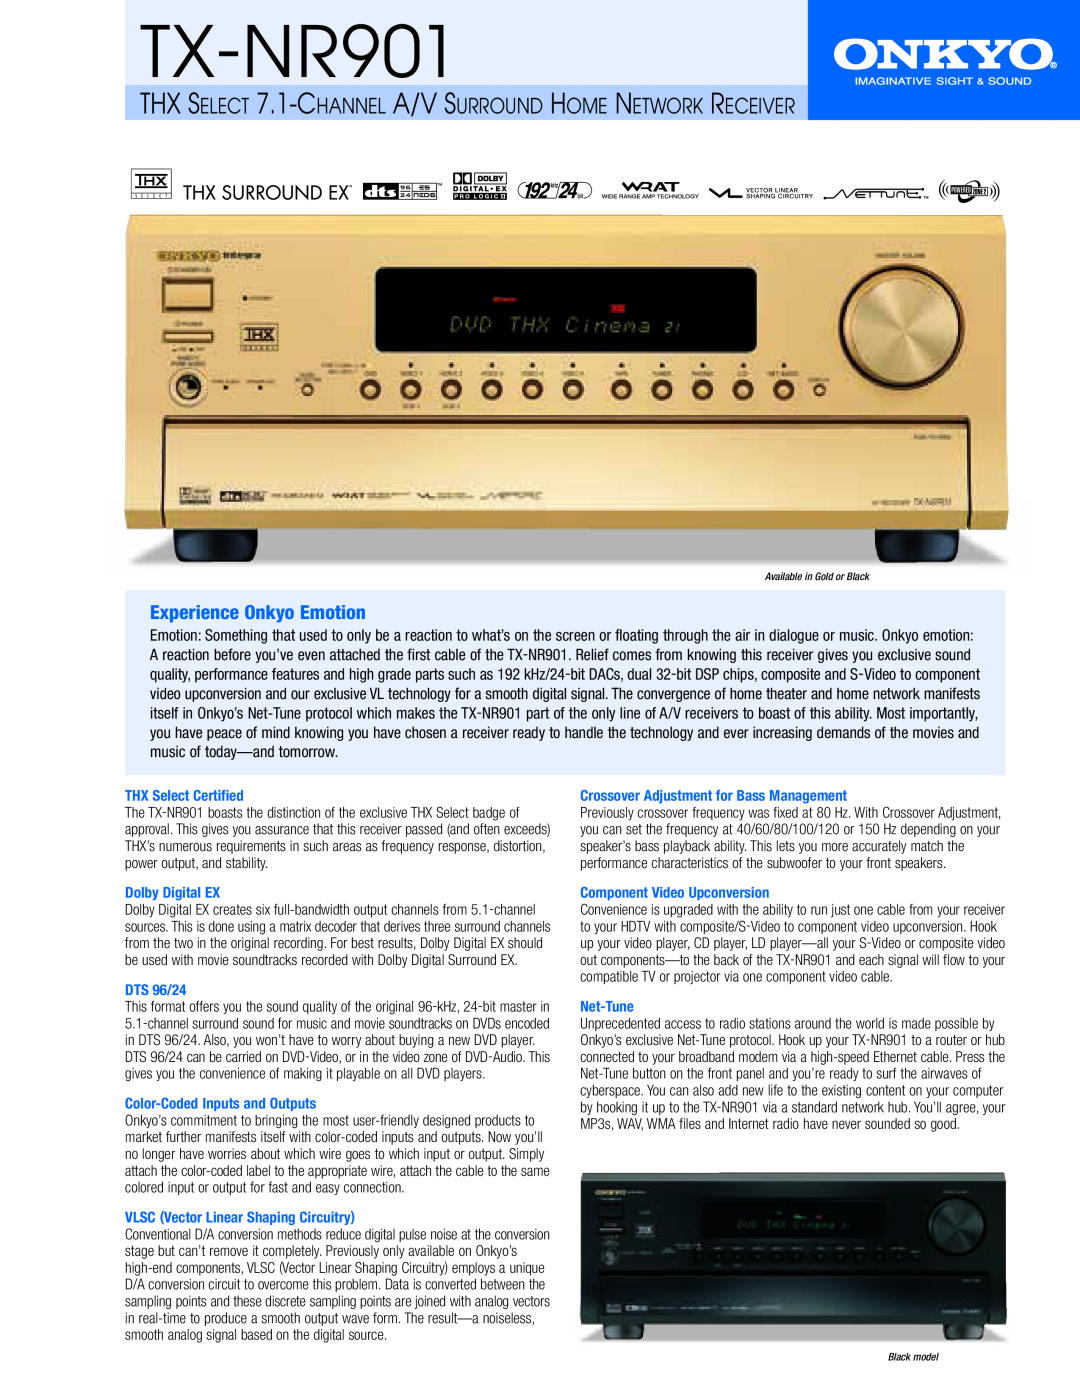 Onkyo TX-NR901 manual THX Select Certified, Dolby Digital EX, DTS 96/24, Color-CodedInputs and Outputs, Net-Tune 